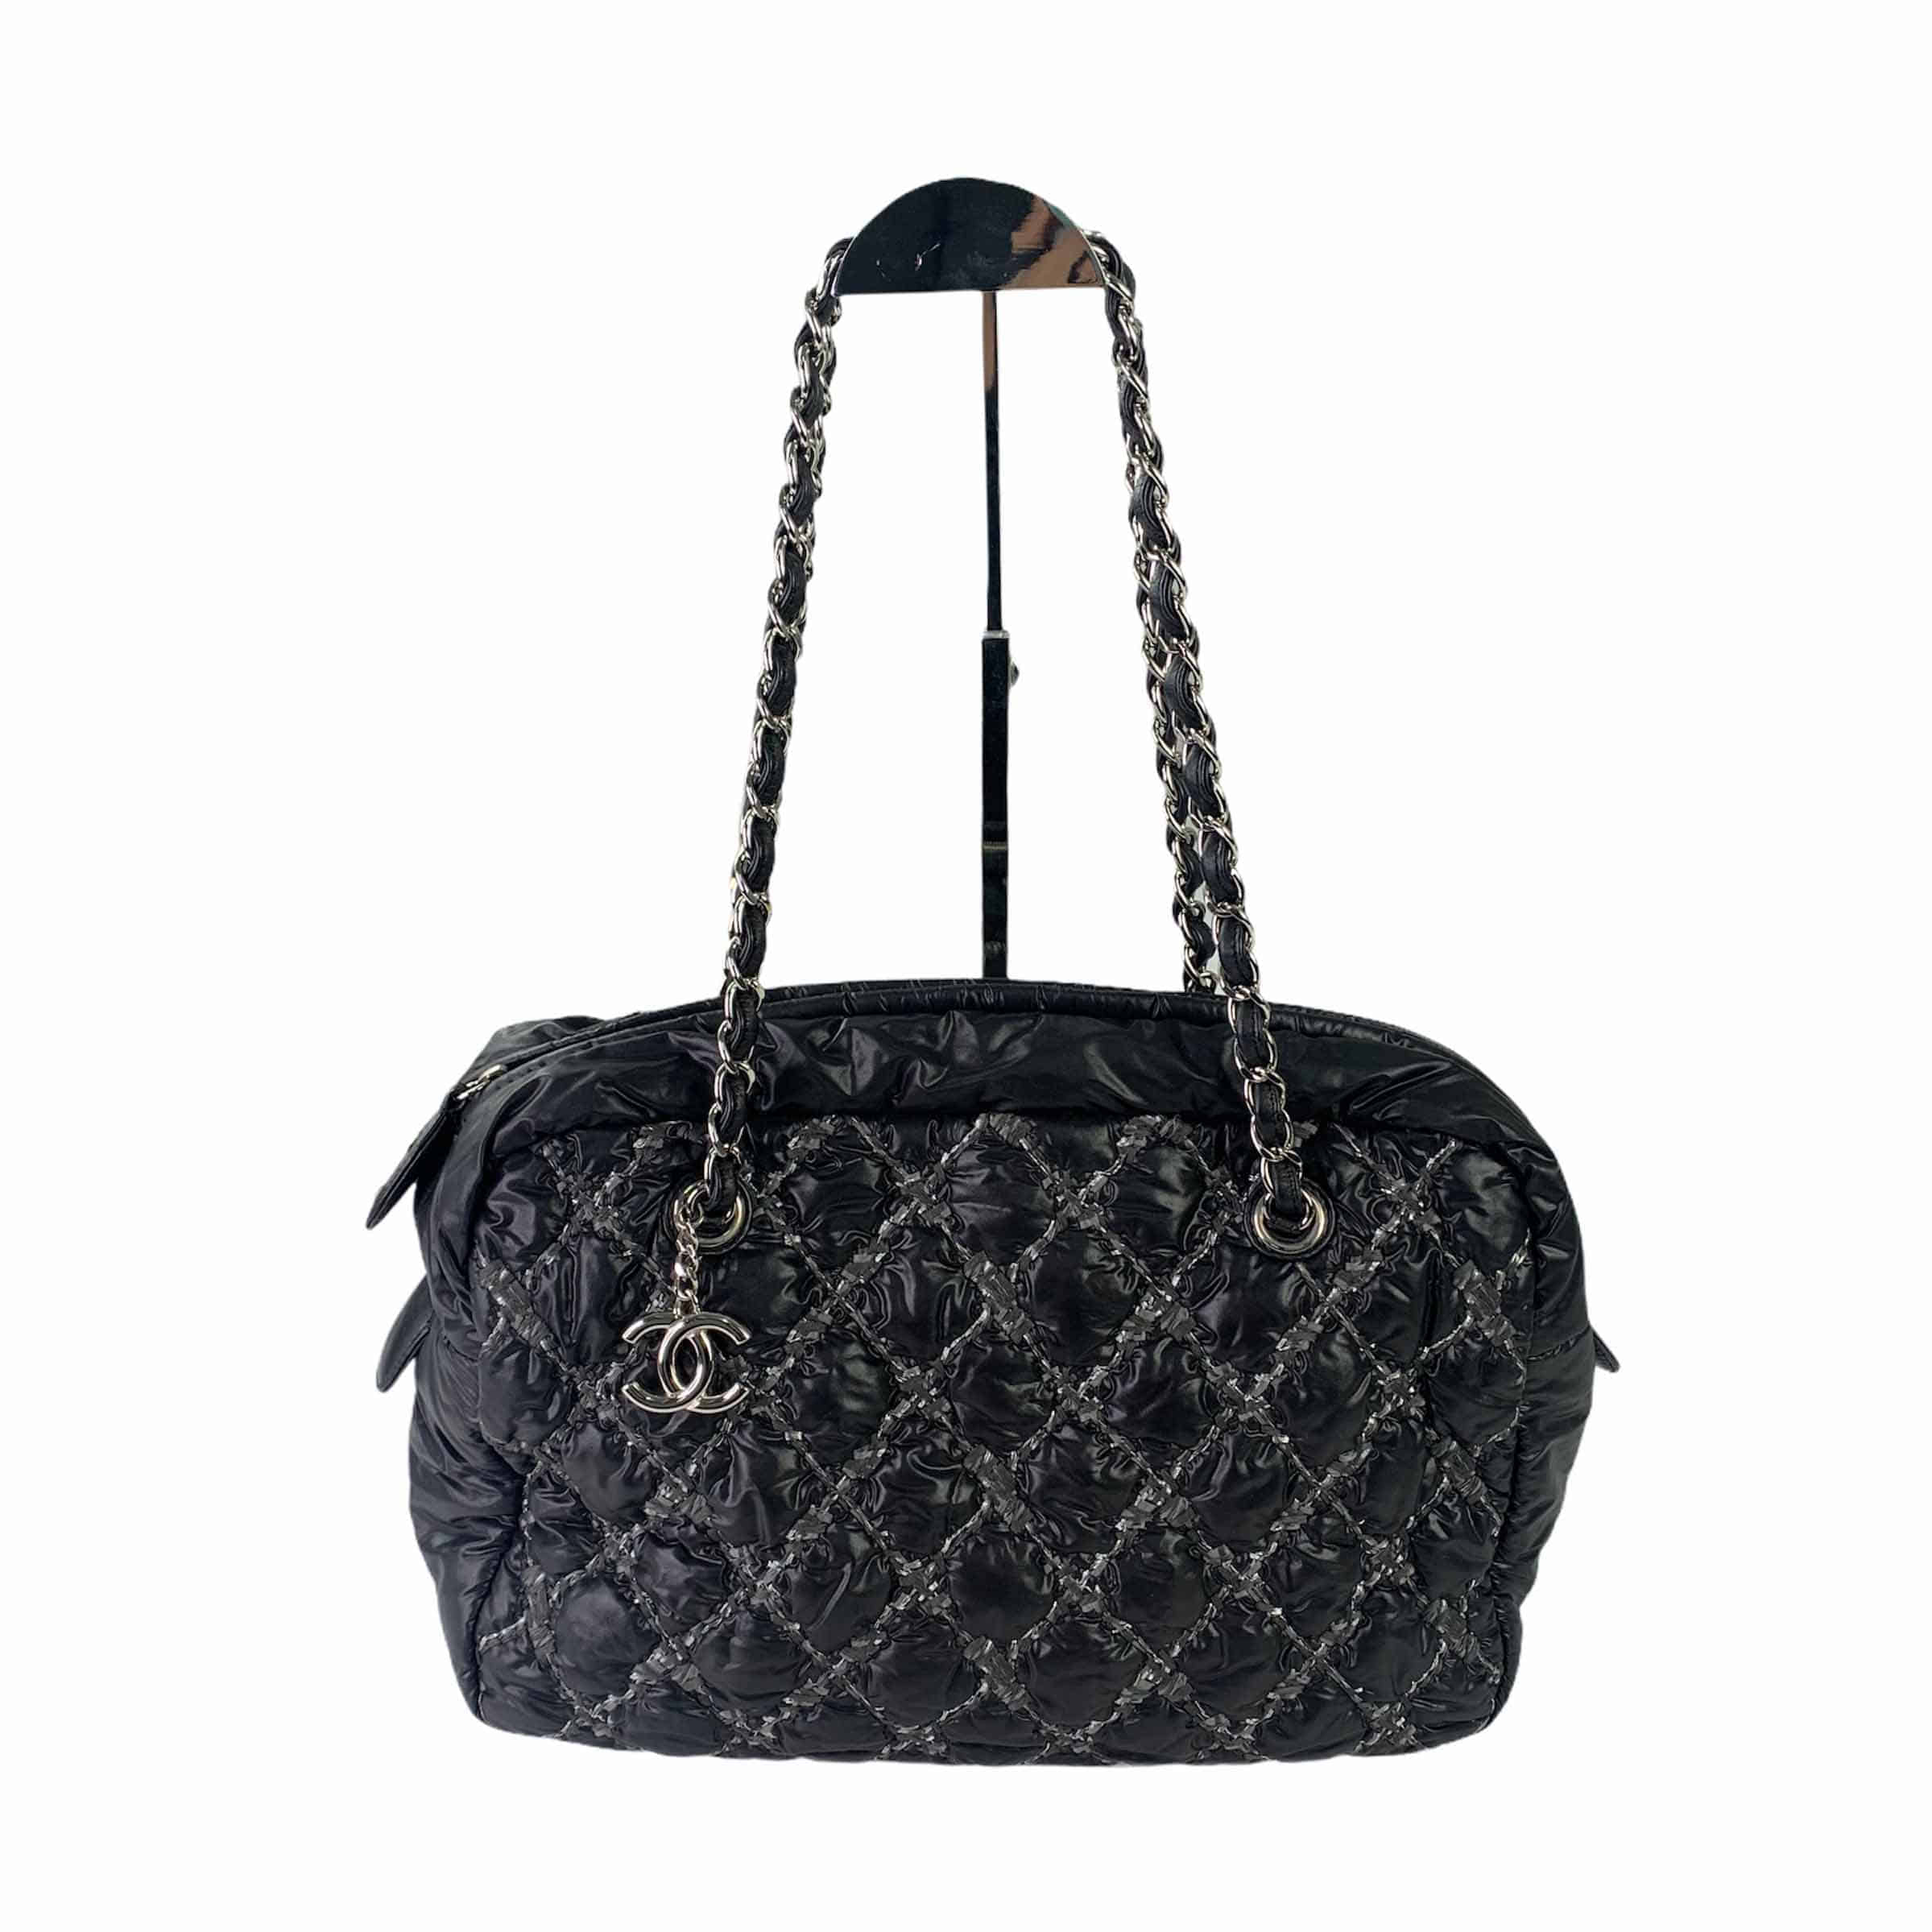 [Chanel] Quilted Padding Bag BK - Size Free